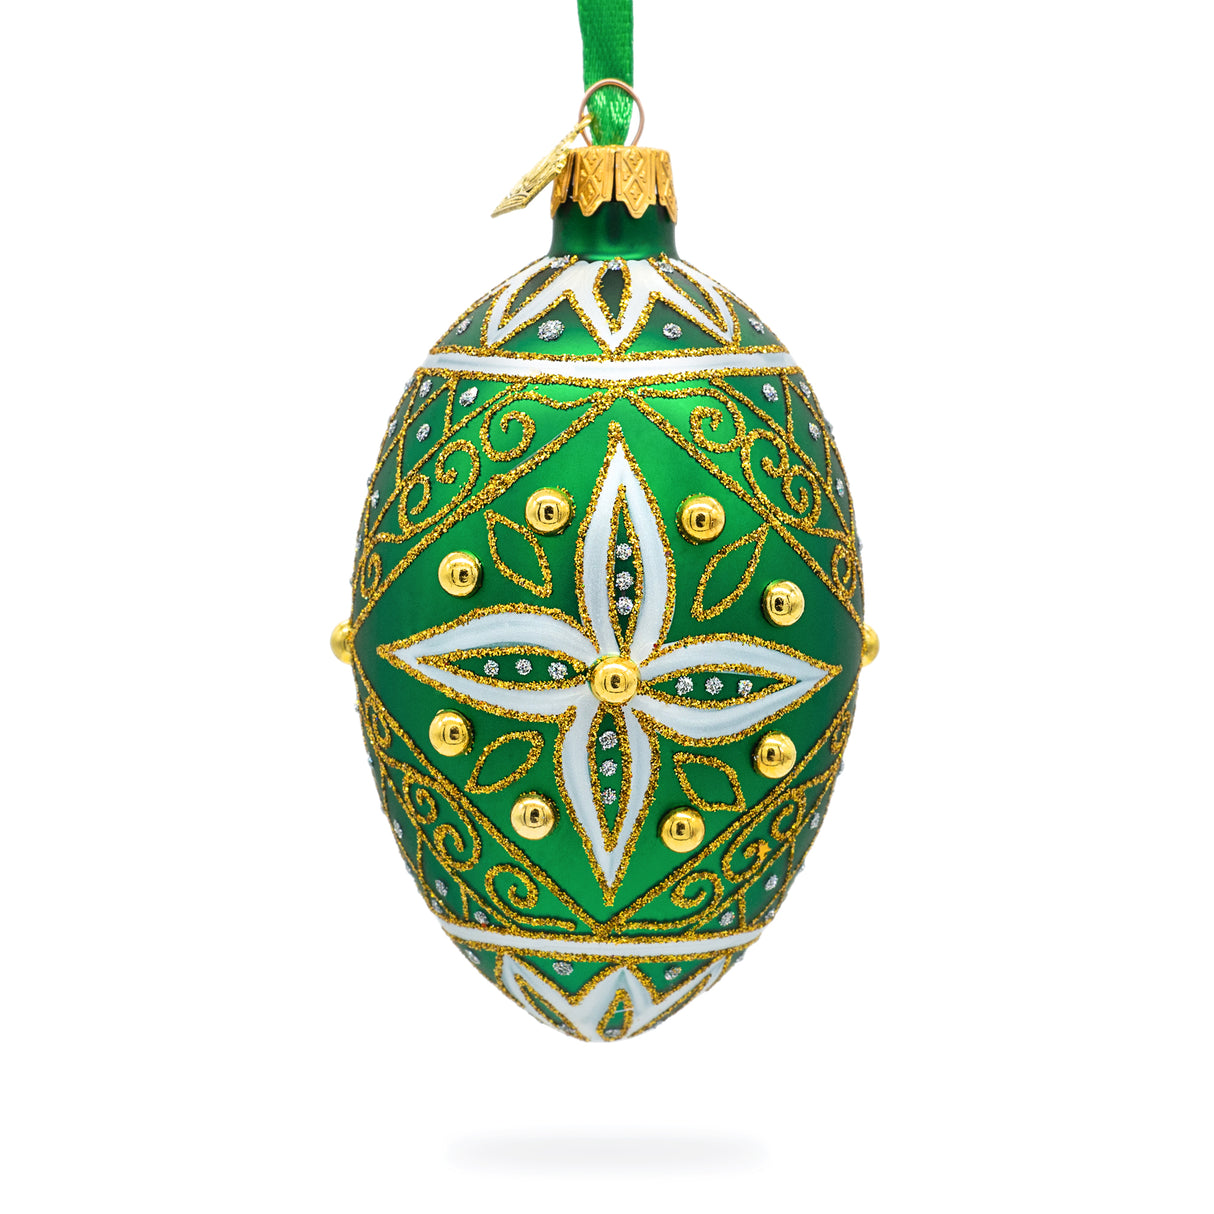 Glass Jeweled White Star on Green Glass Egg Ornament 4 Inches in Green color Oval